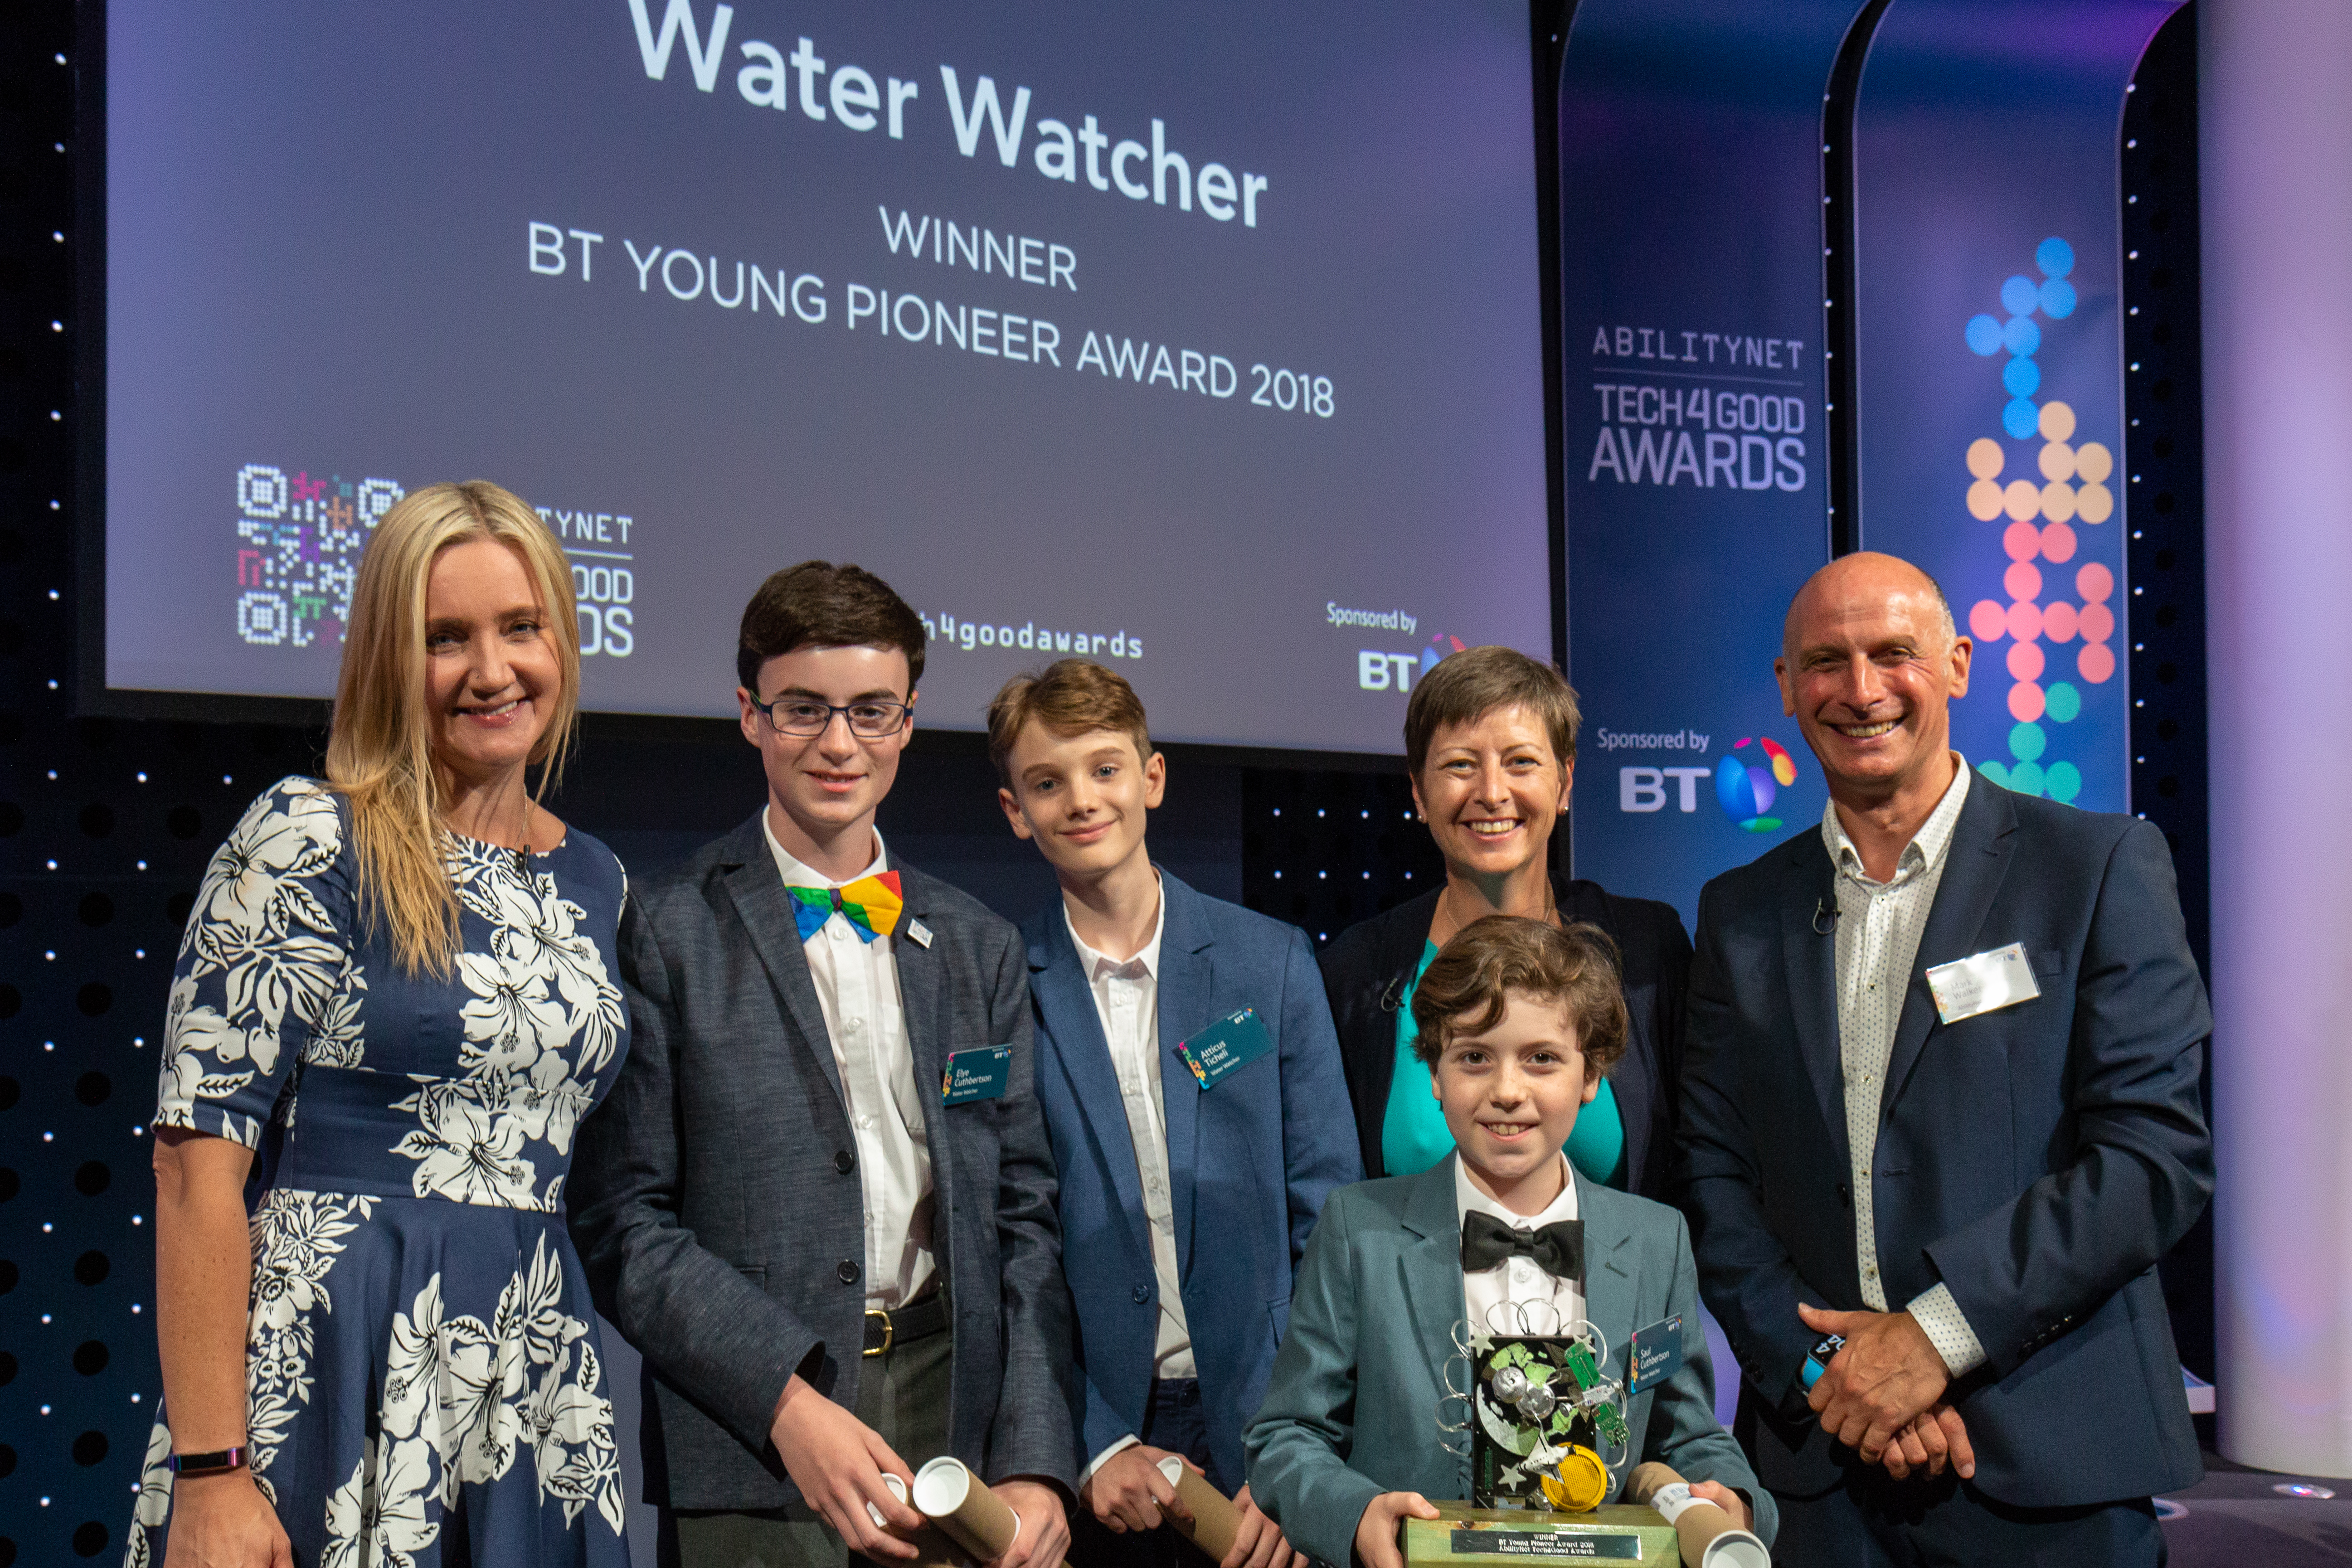 Kate Russell, Mark Walker and the 2018 BT Young Pioneer Award winners - Water Watcher